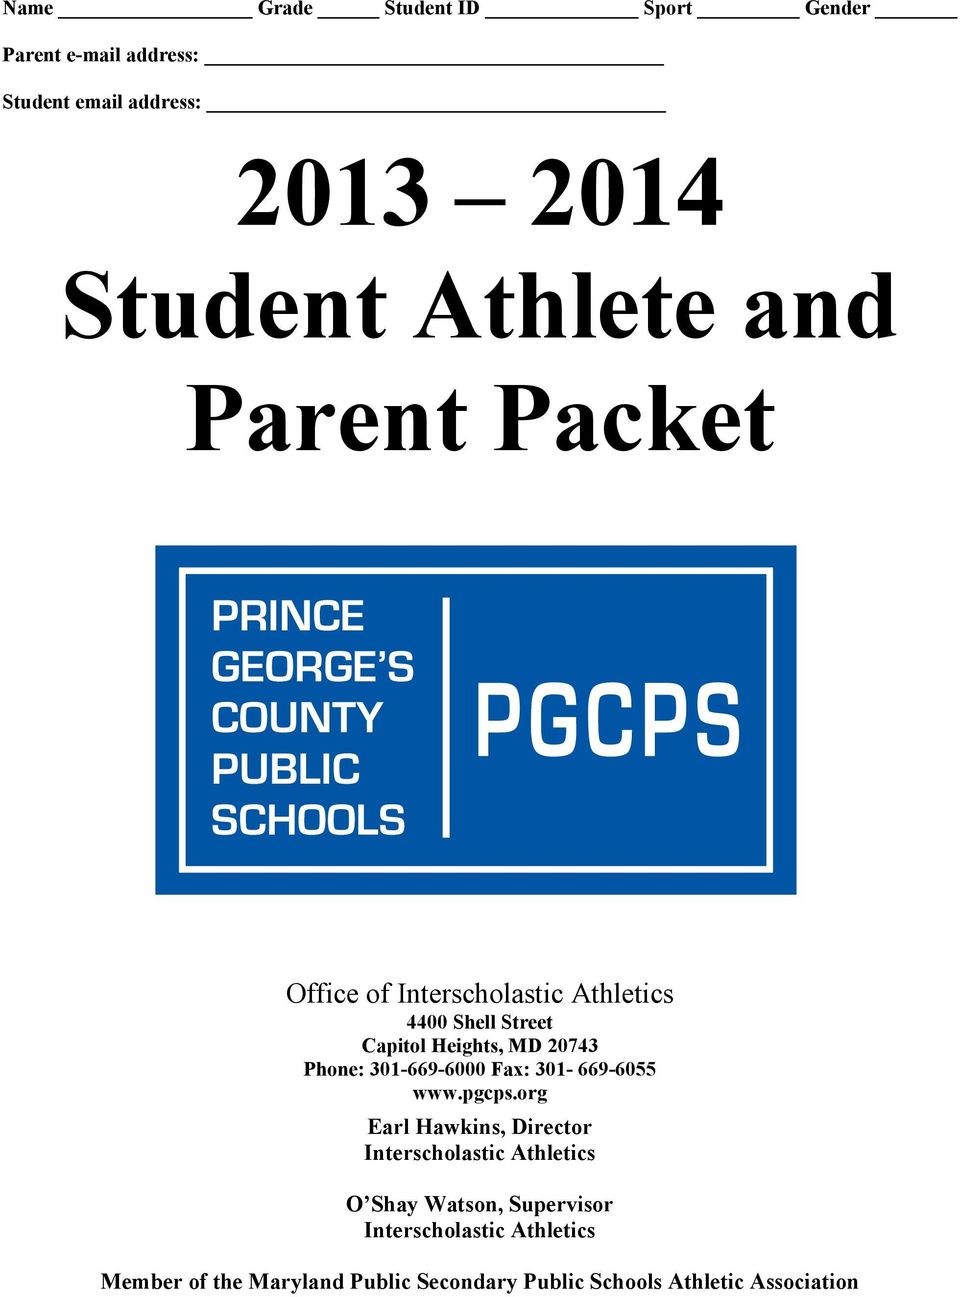 MD 20743 Phone: 301-669-6000 Fax: 301-669-6055 www.pgcps.